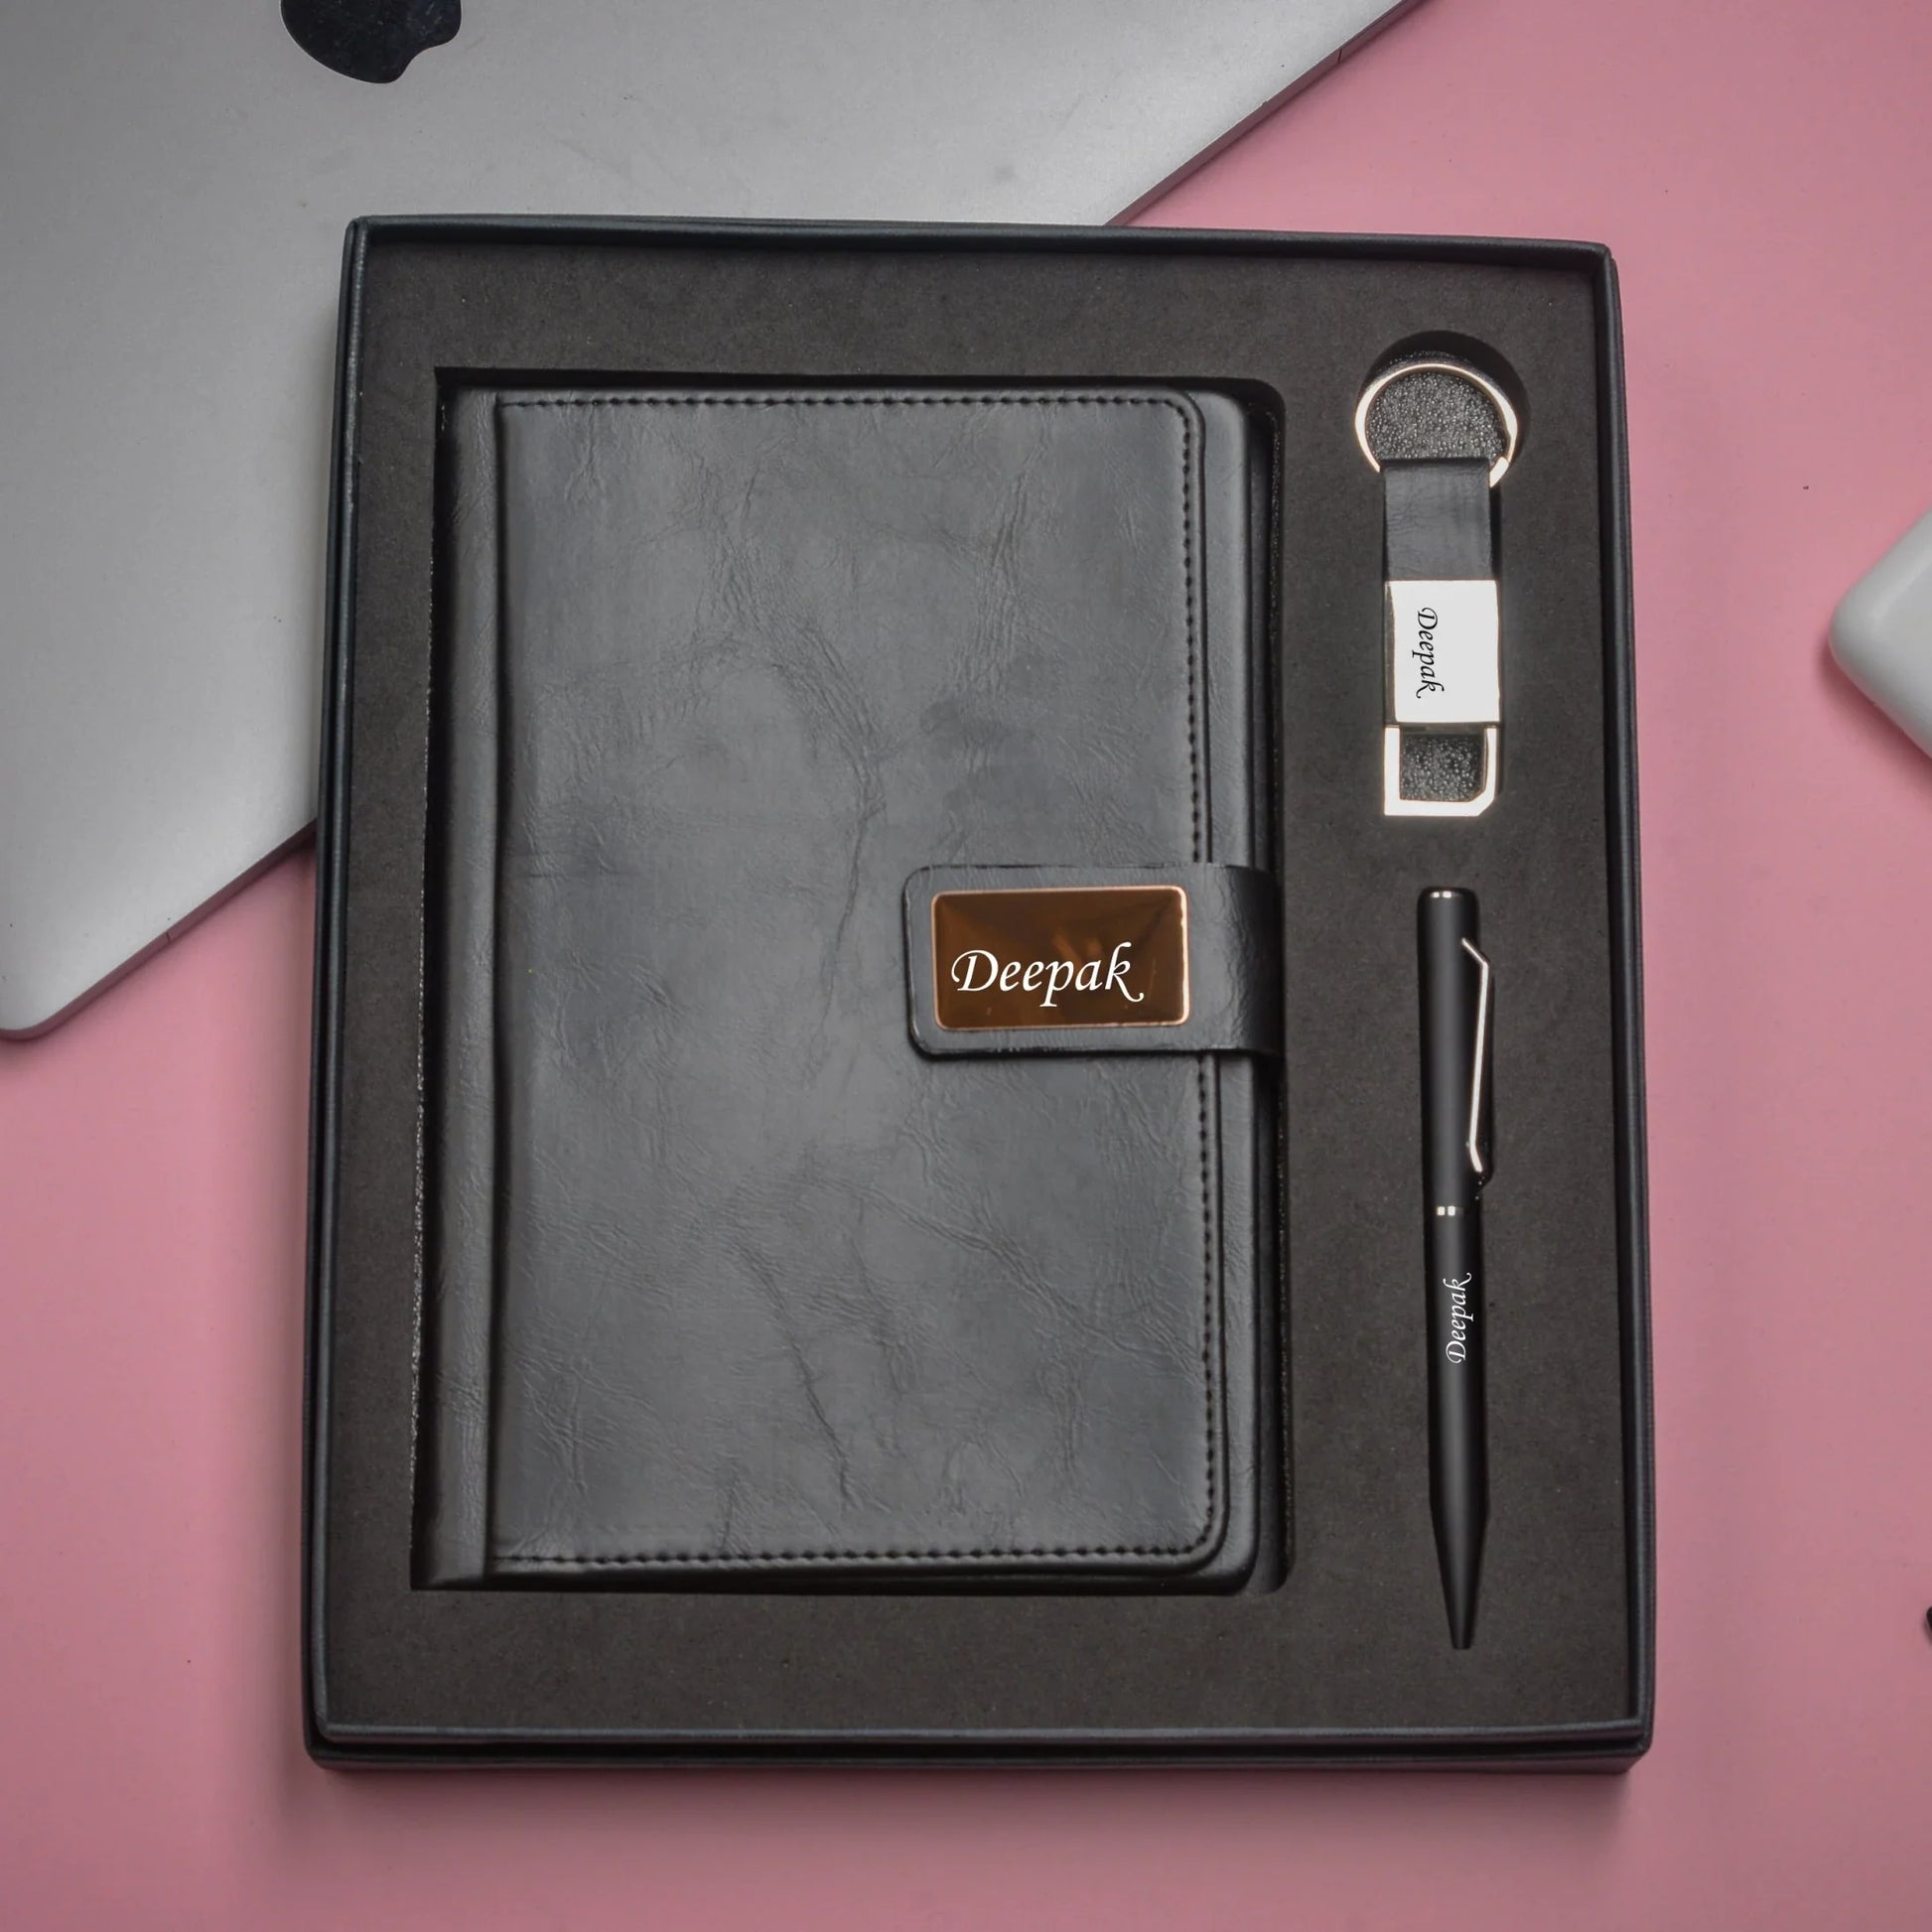 "Write with flair and creativity with our artistic corporate set. Our expressive diary, bold pen, and unique keychain will inspire you to unleash your creativity and bring your ideas to life."